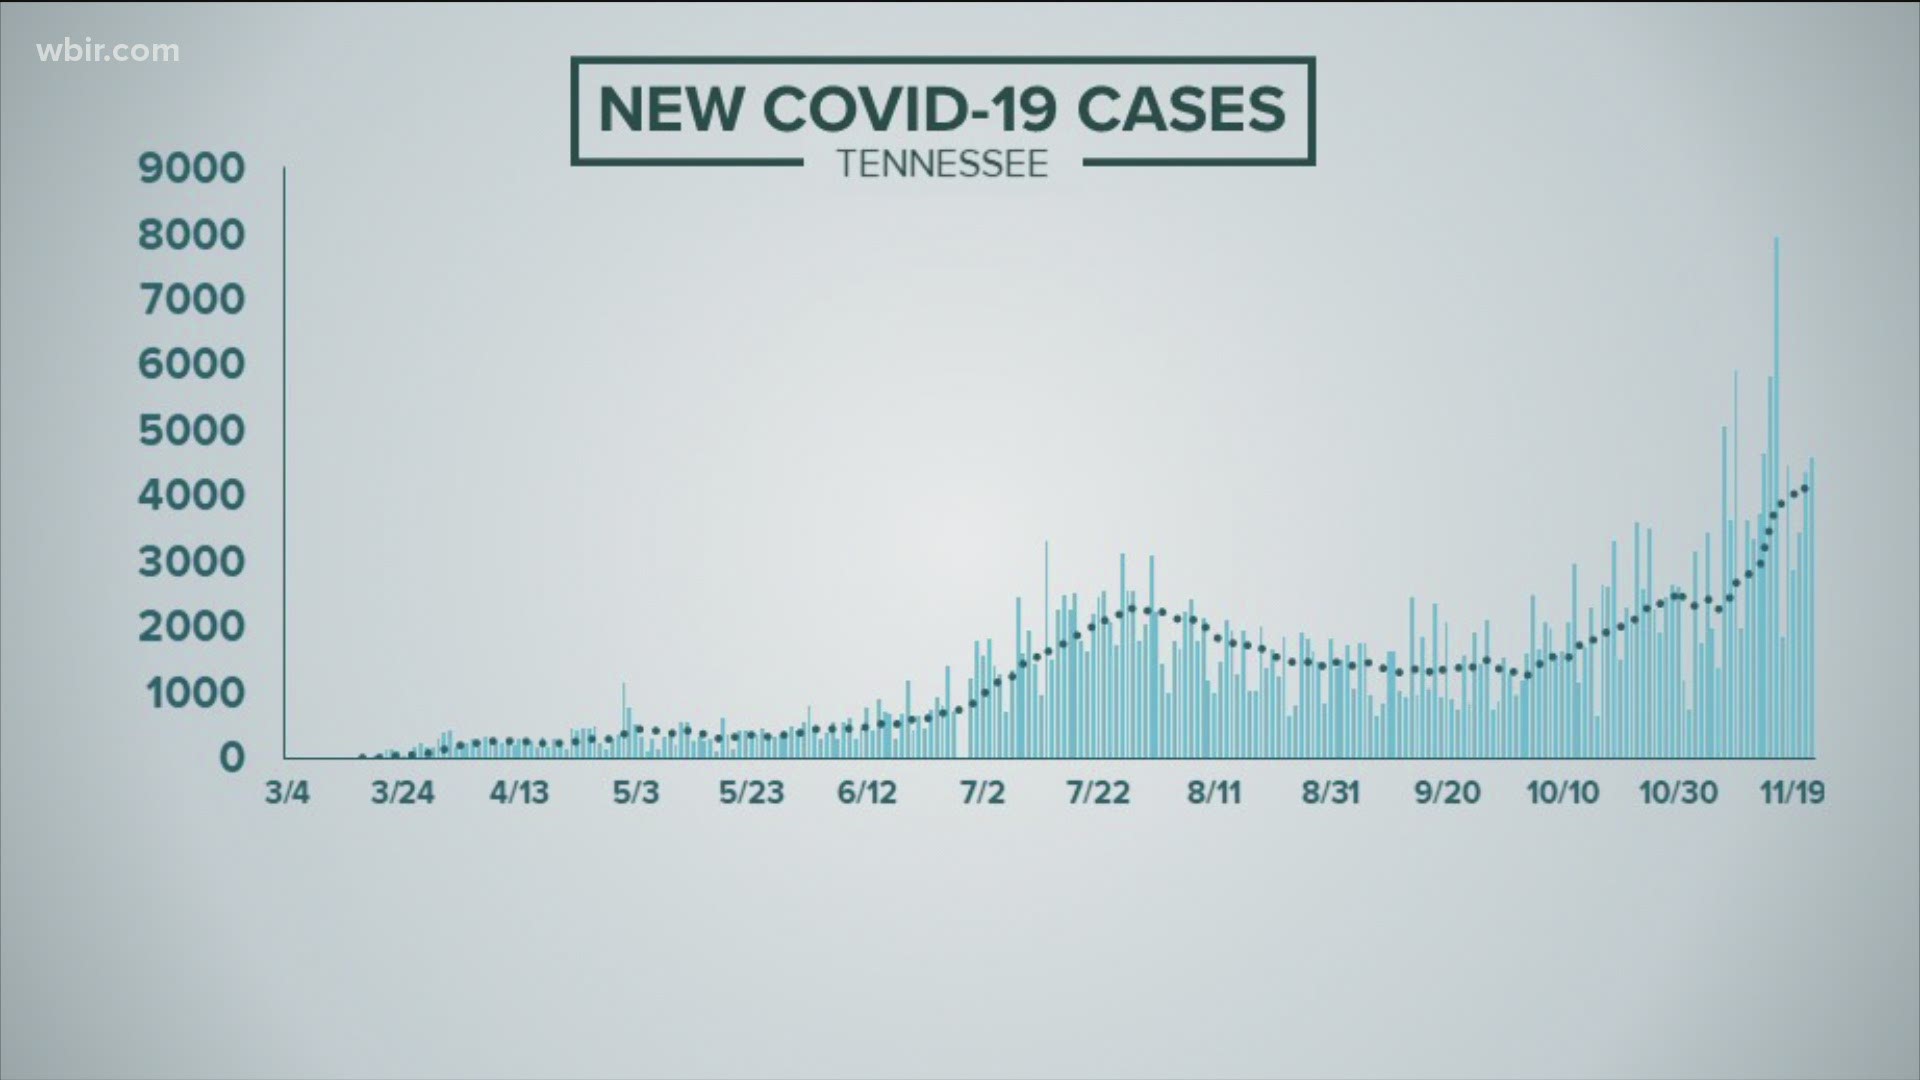 COVID-19 in TN: Tennessee reporting 4,340 new cases of COVID-19, 7 new deaths